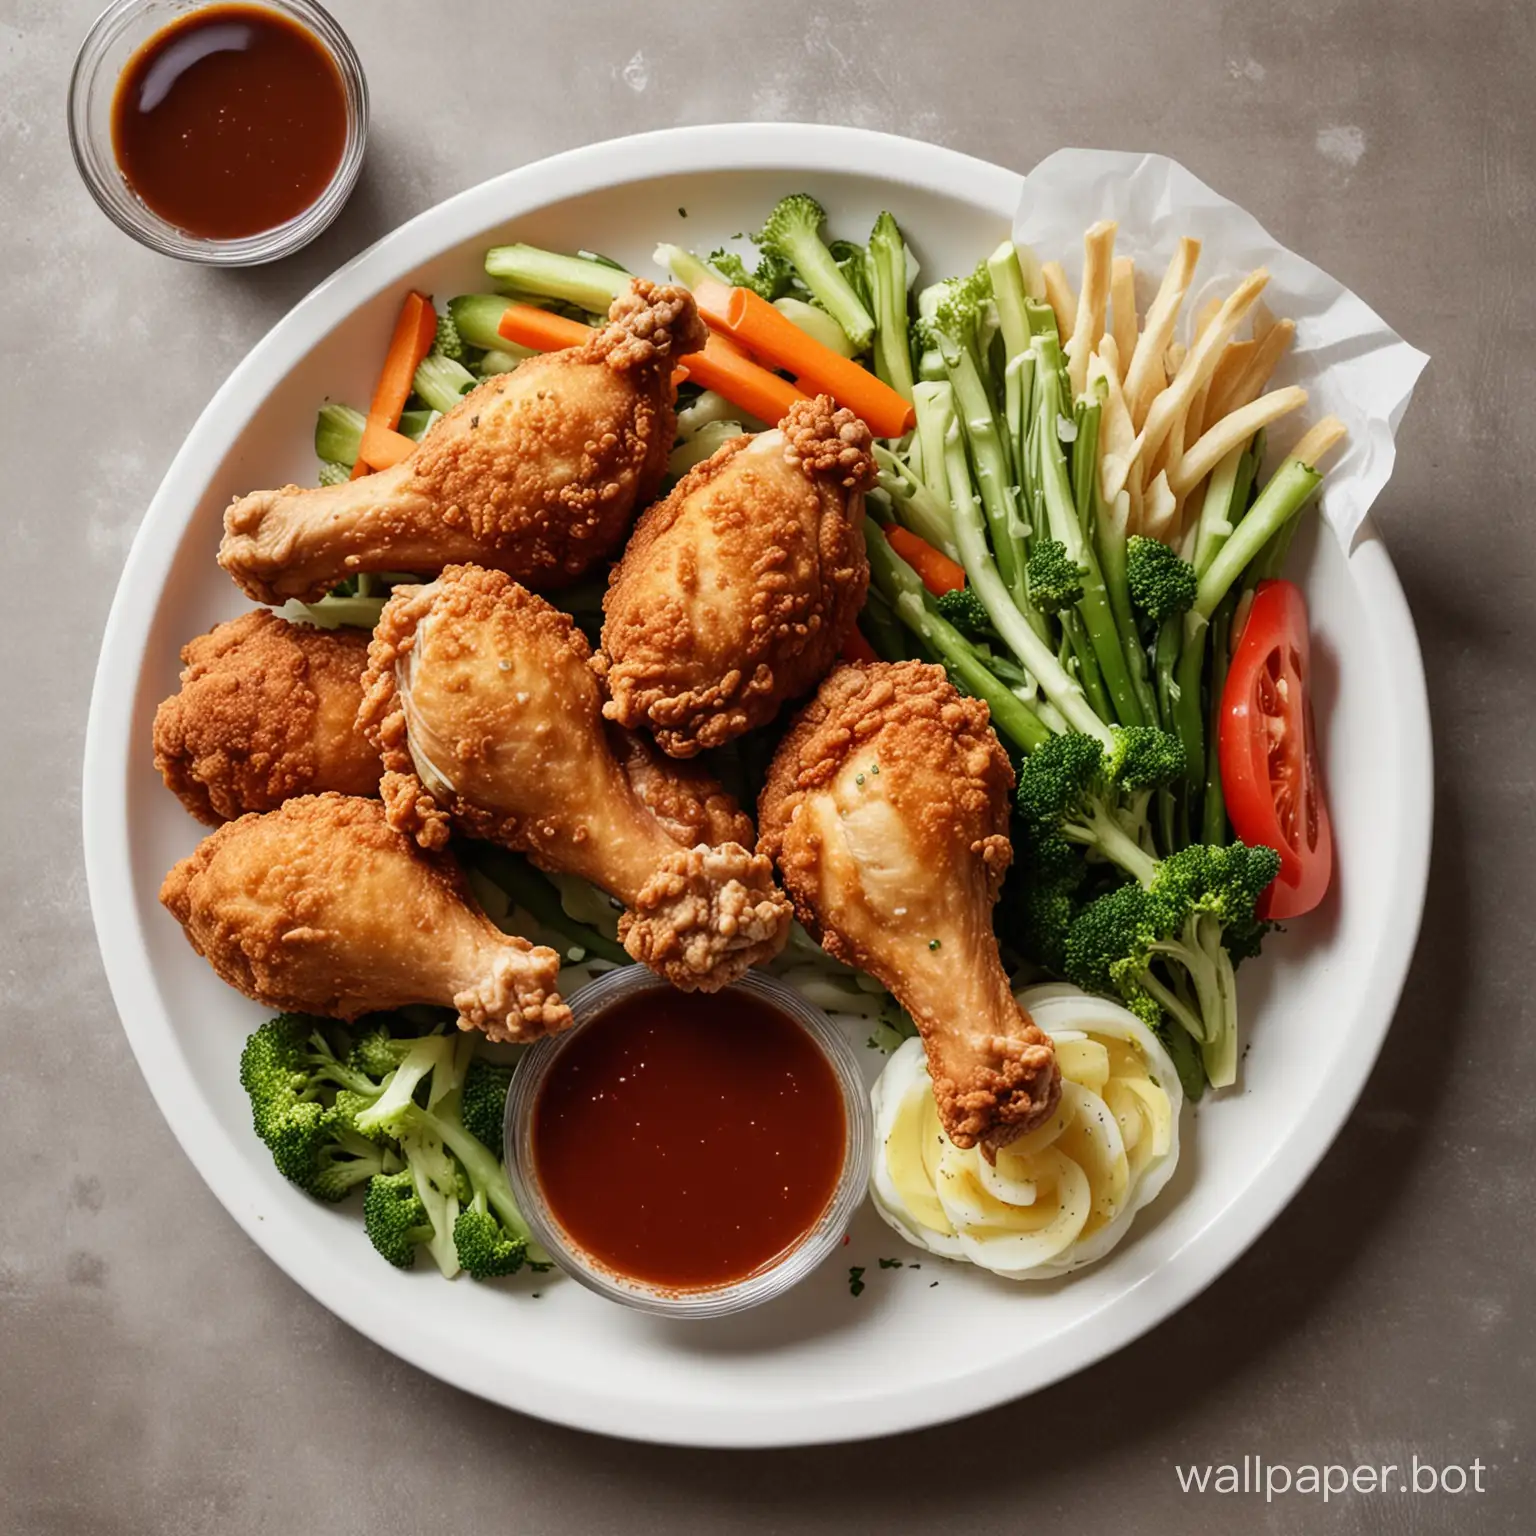 Fried chicken legs + dipping sauce + vegetables